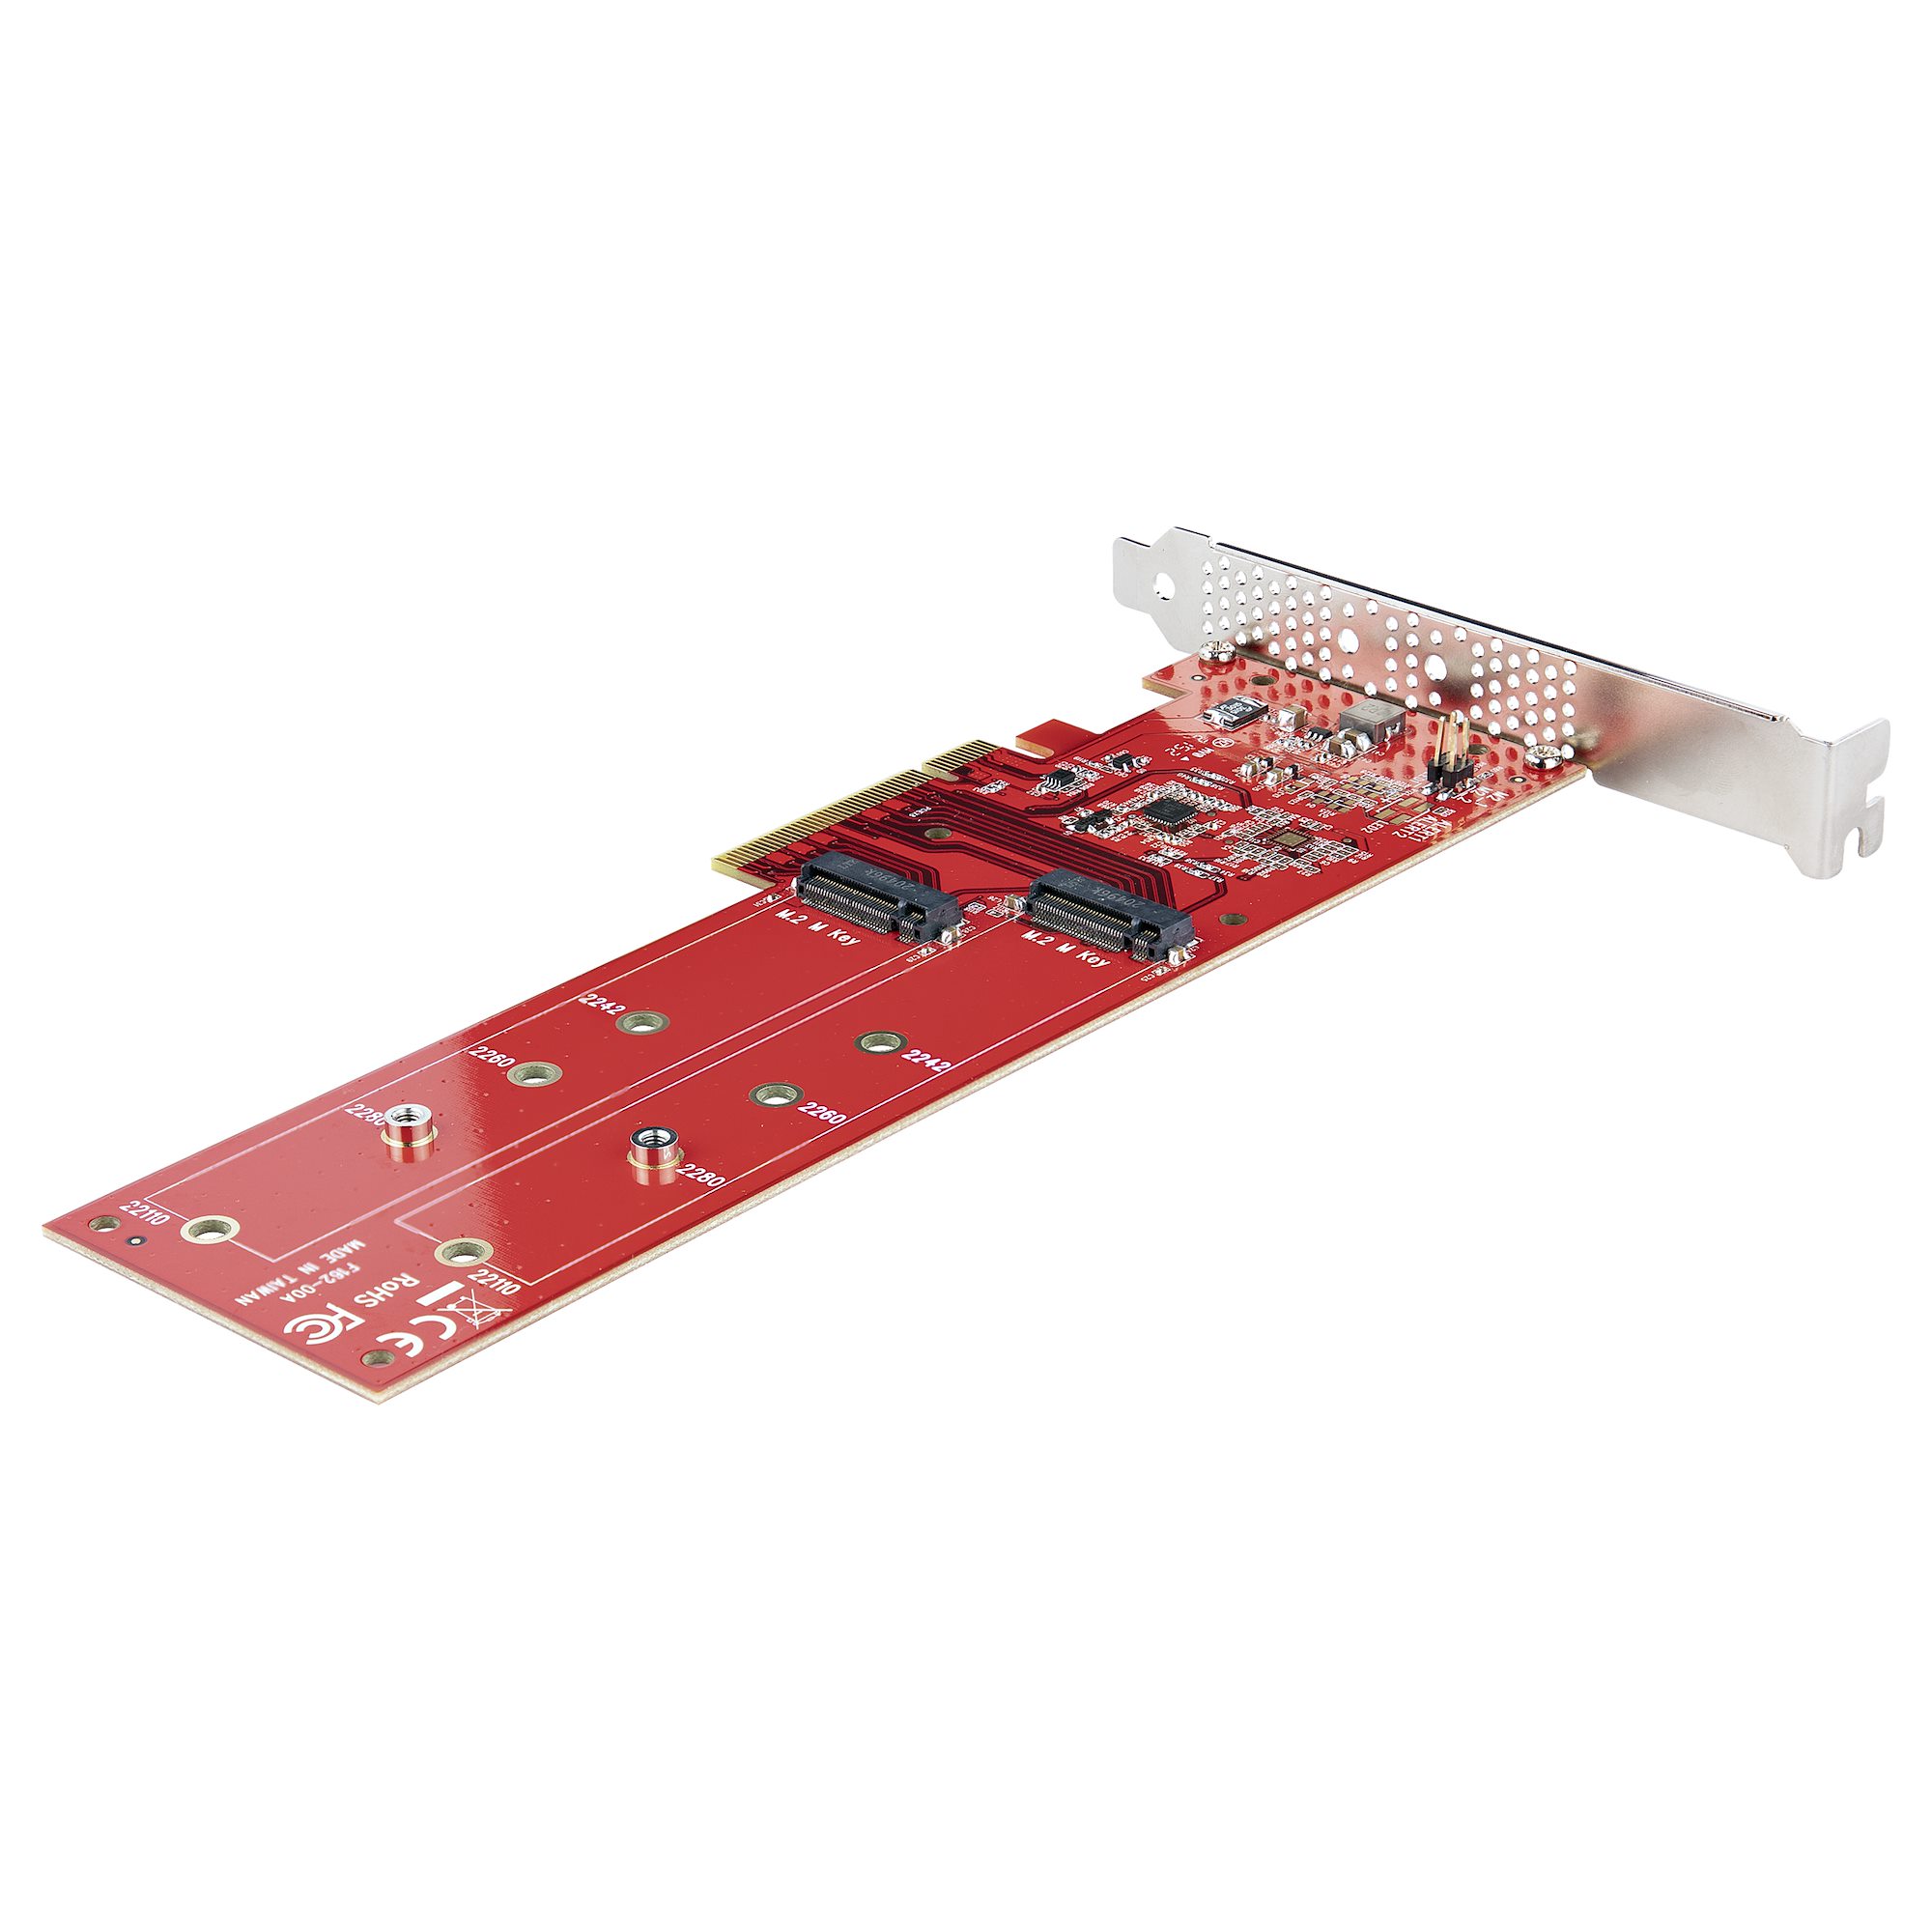 M.2 PCIe SSD Adapter, NVMe / AHCI - Drive Adapters Drive StarTech.com